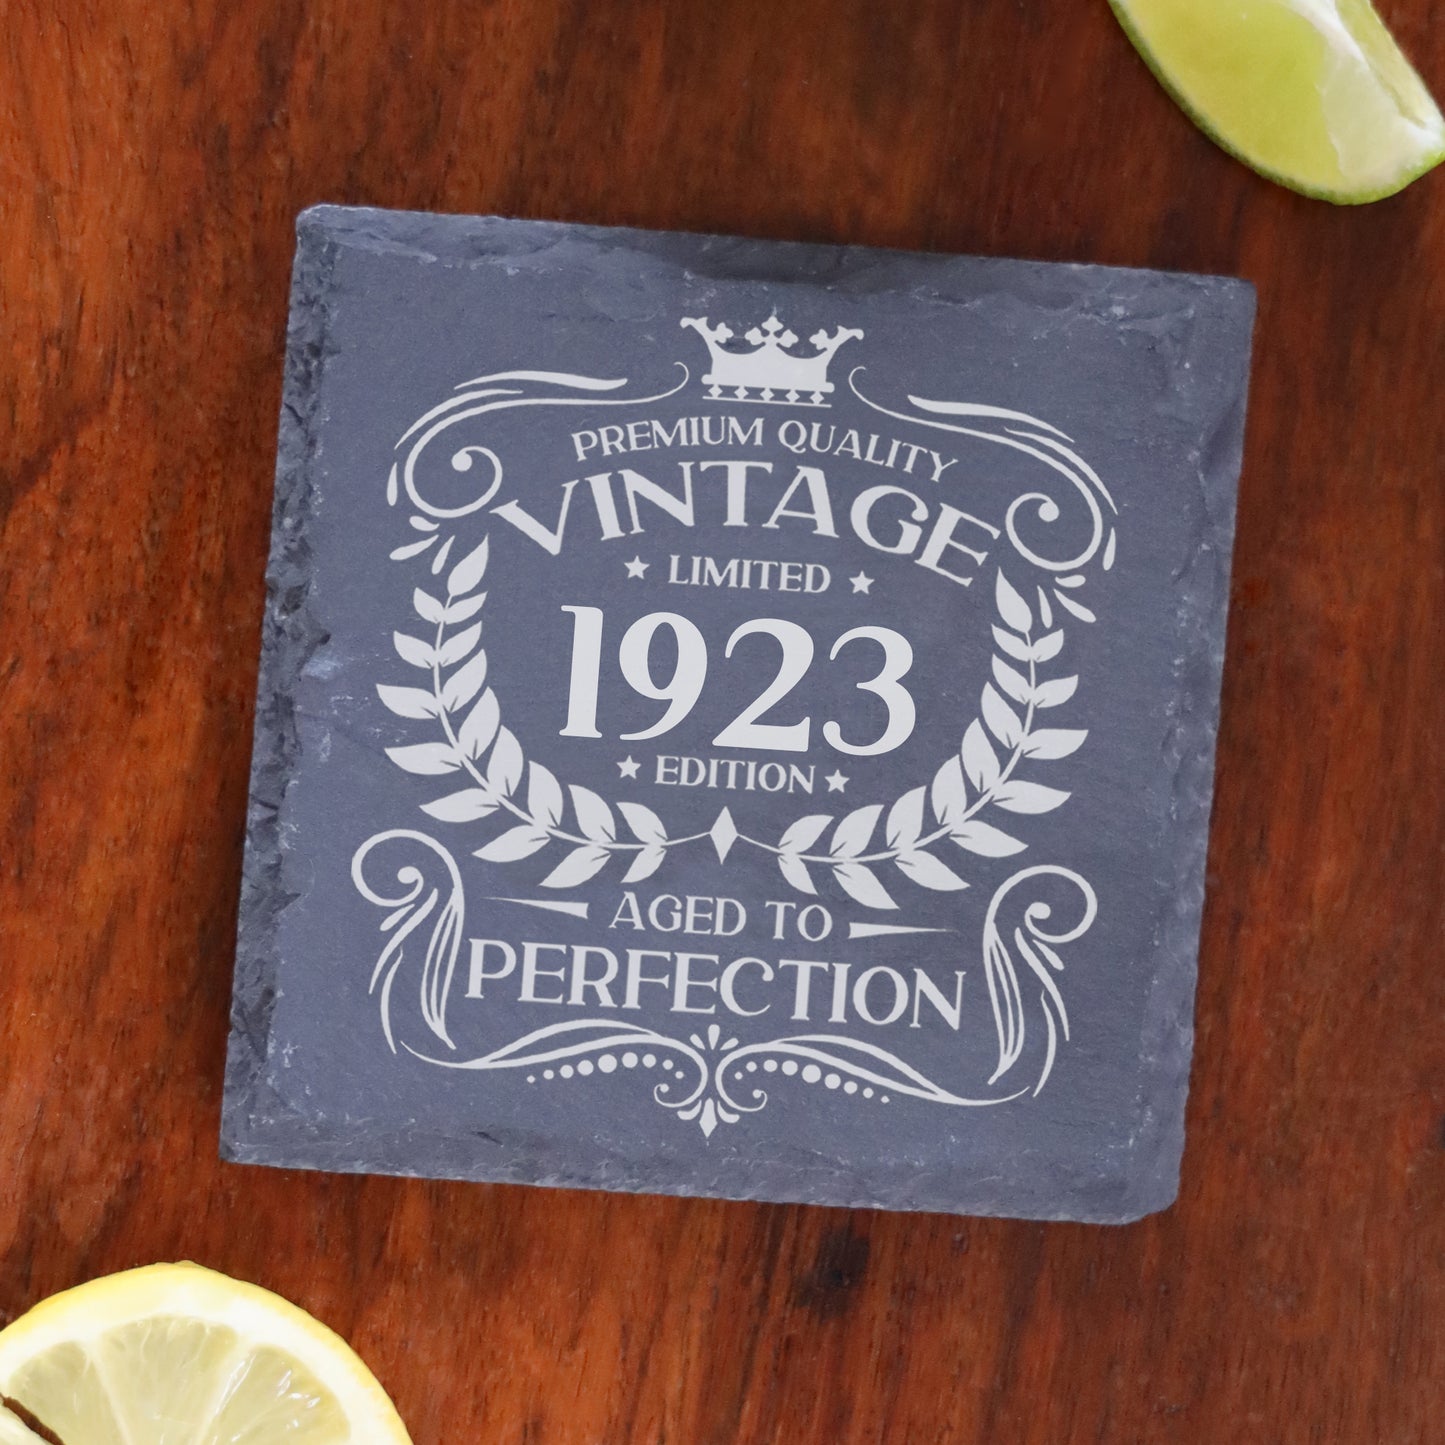 Personalised Vintage 1923 Mug and/or Coaster  - Always Looking Good - Square Coaster On Its Own  